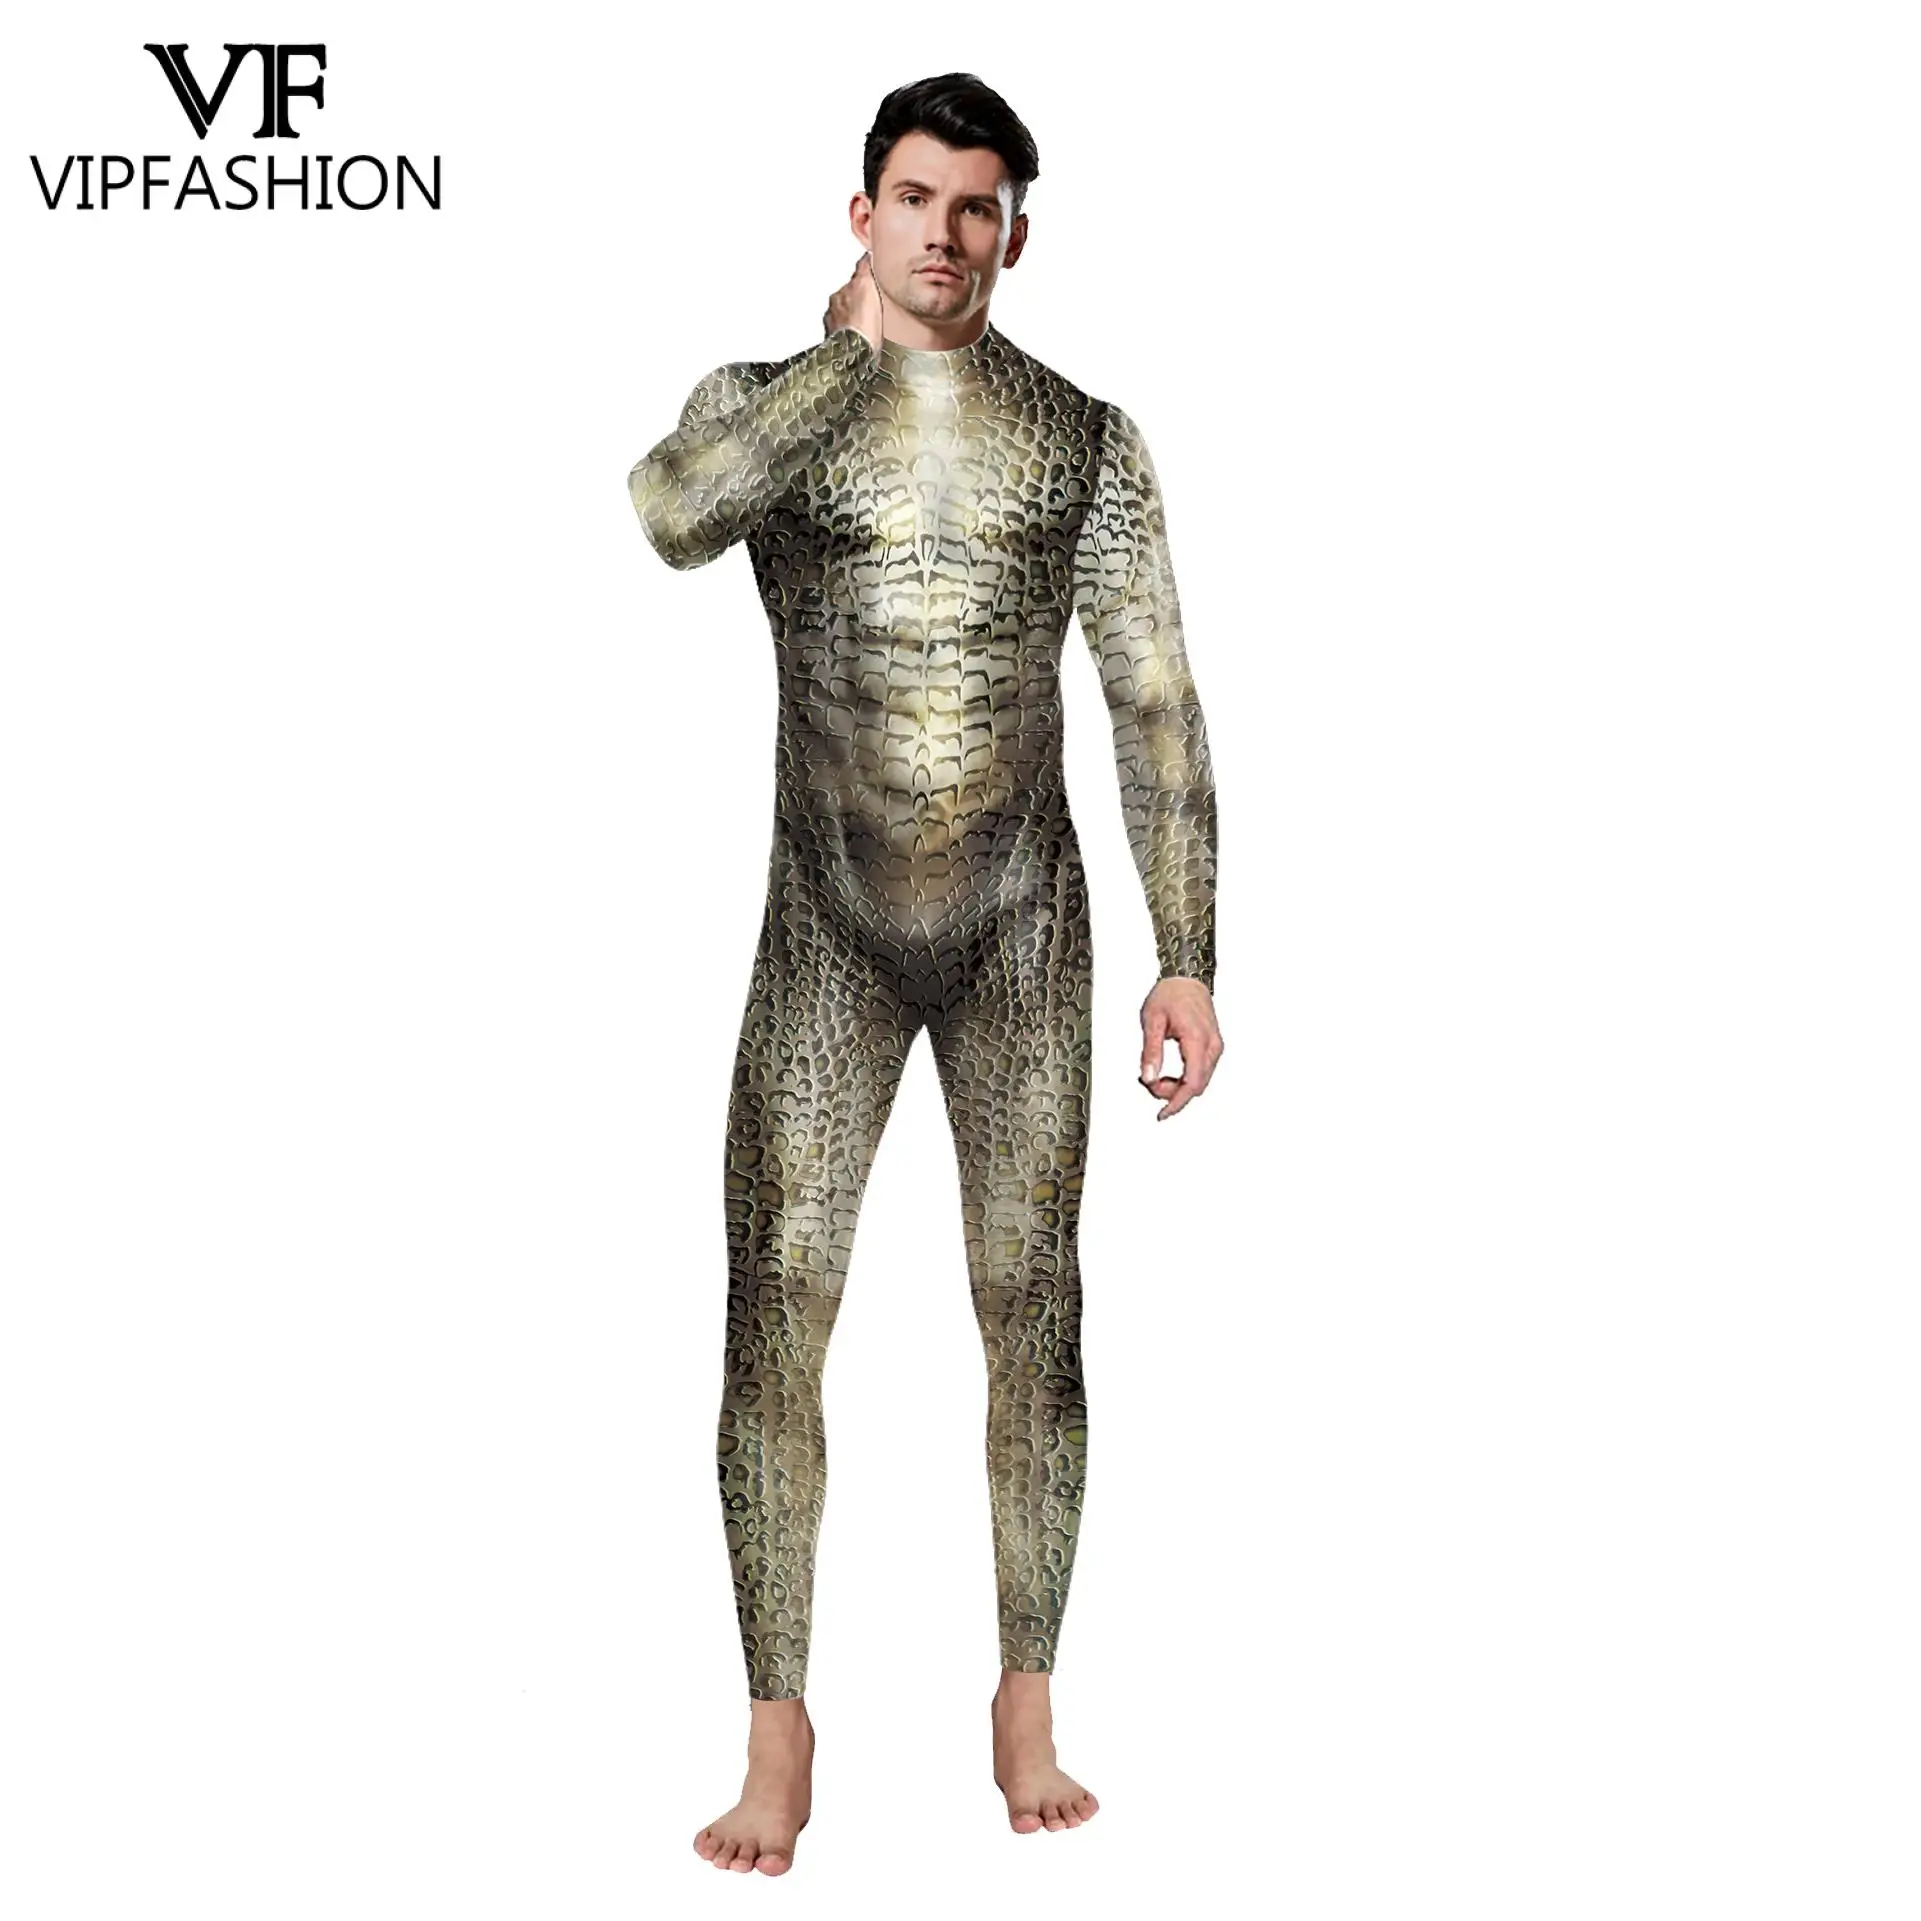 

VIP FASHION Crocodile Printed Cosplay Costume 12% Spendex Men Zentai Bodyuist Halloween Holiday Party Jumpsuit Disguise Suit